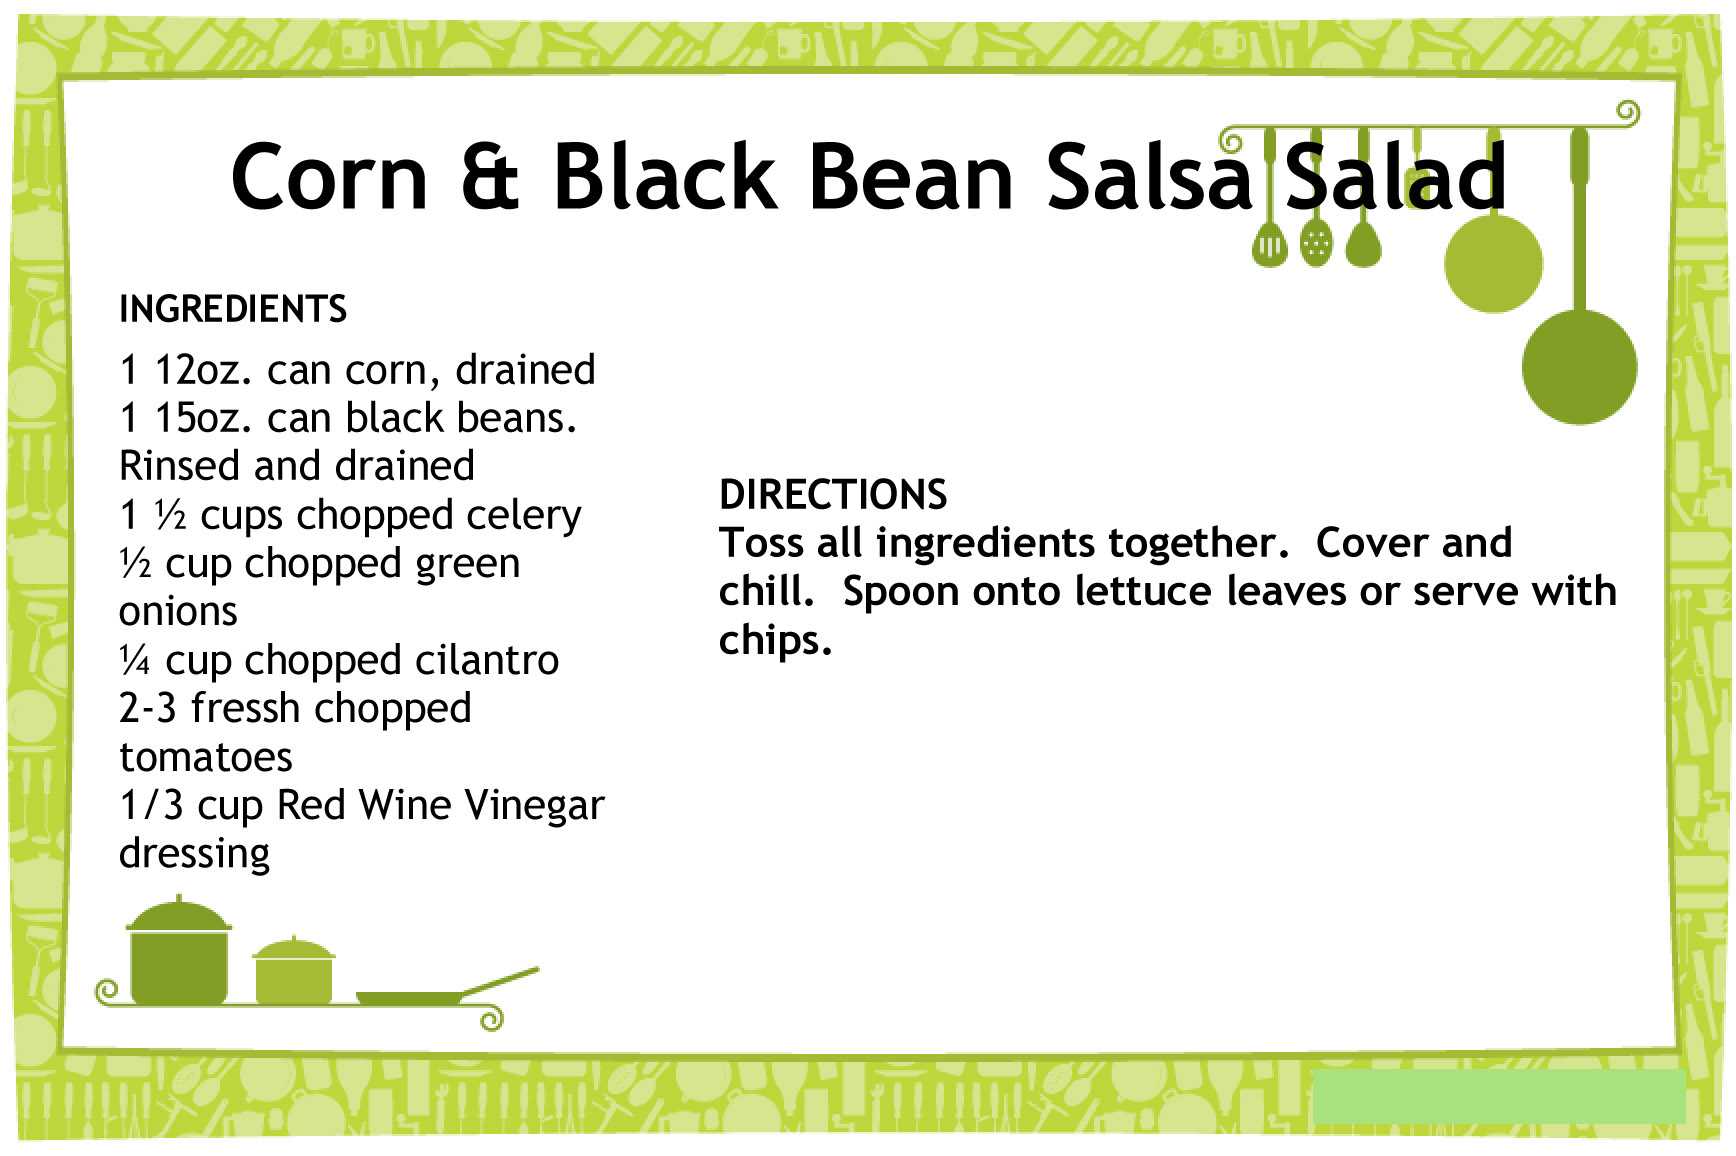 Gallery For Gt Recipe Template For Microsoft Word Mesa 39 S In Microsoft Word Recipe Card Template